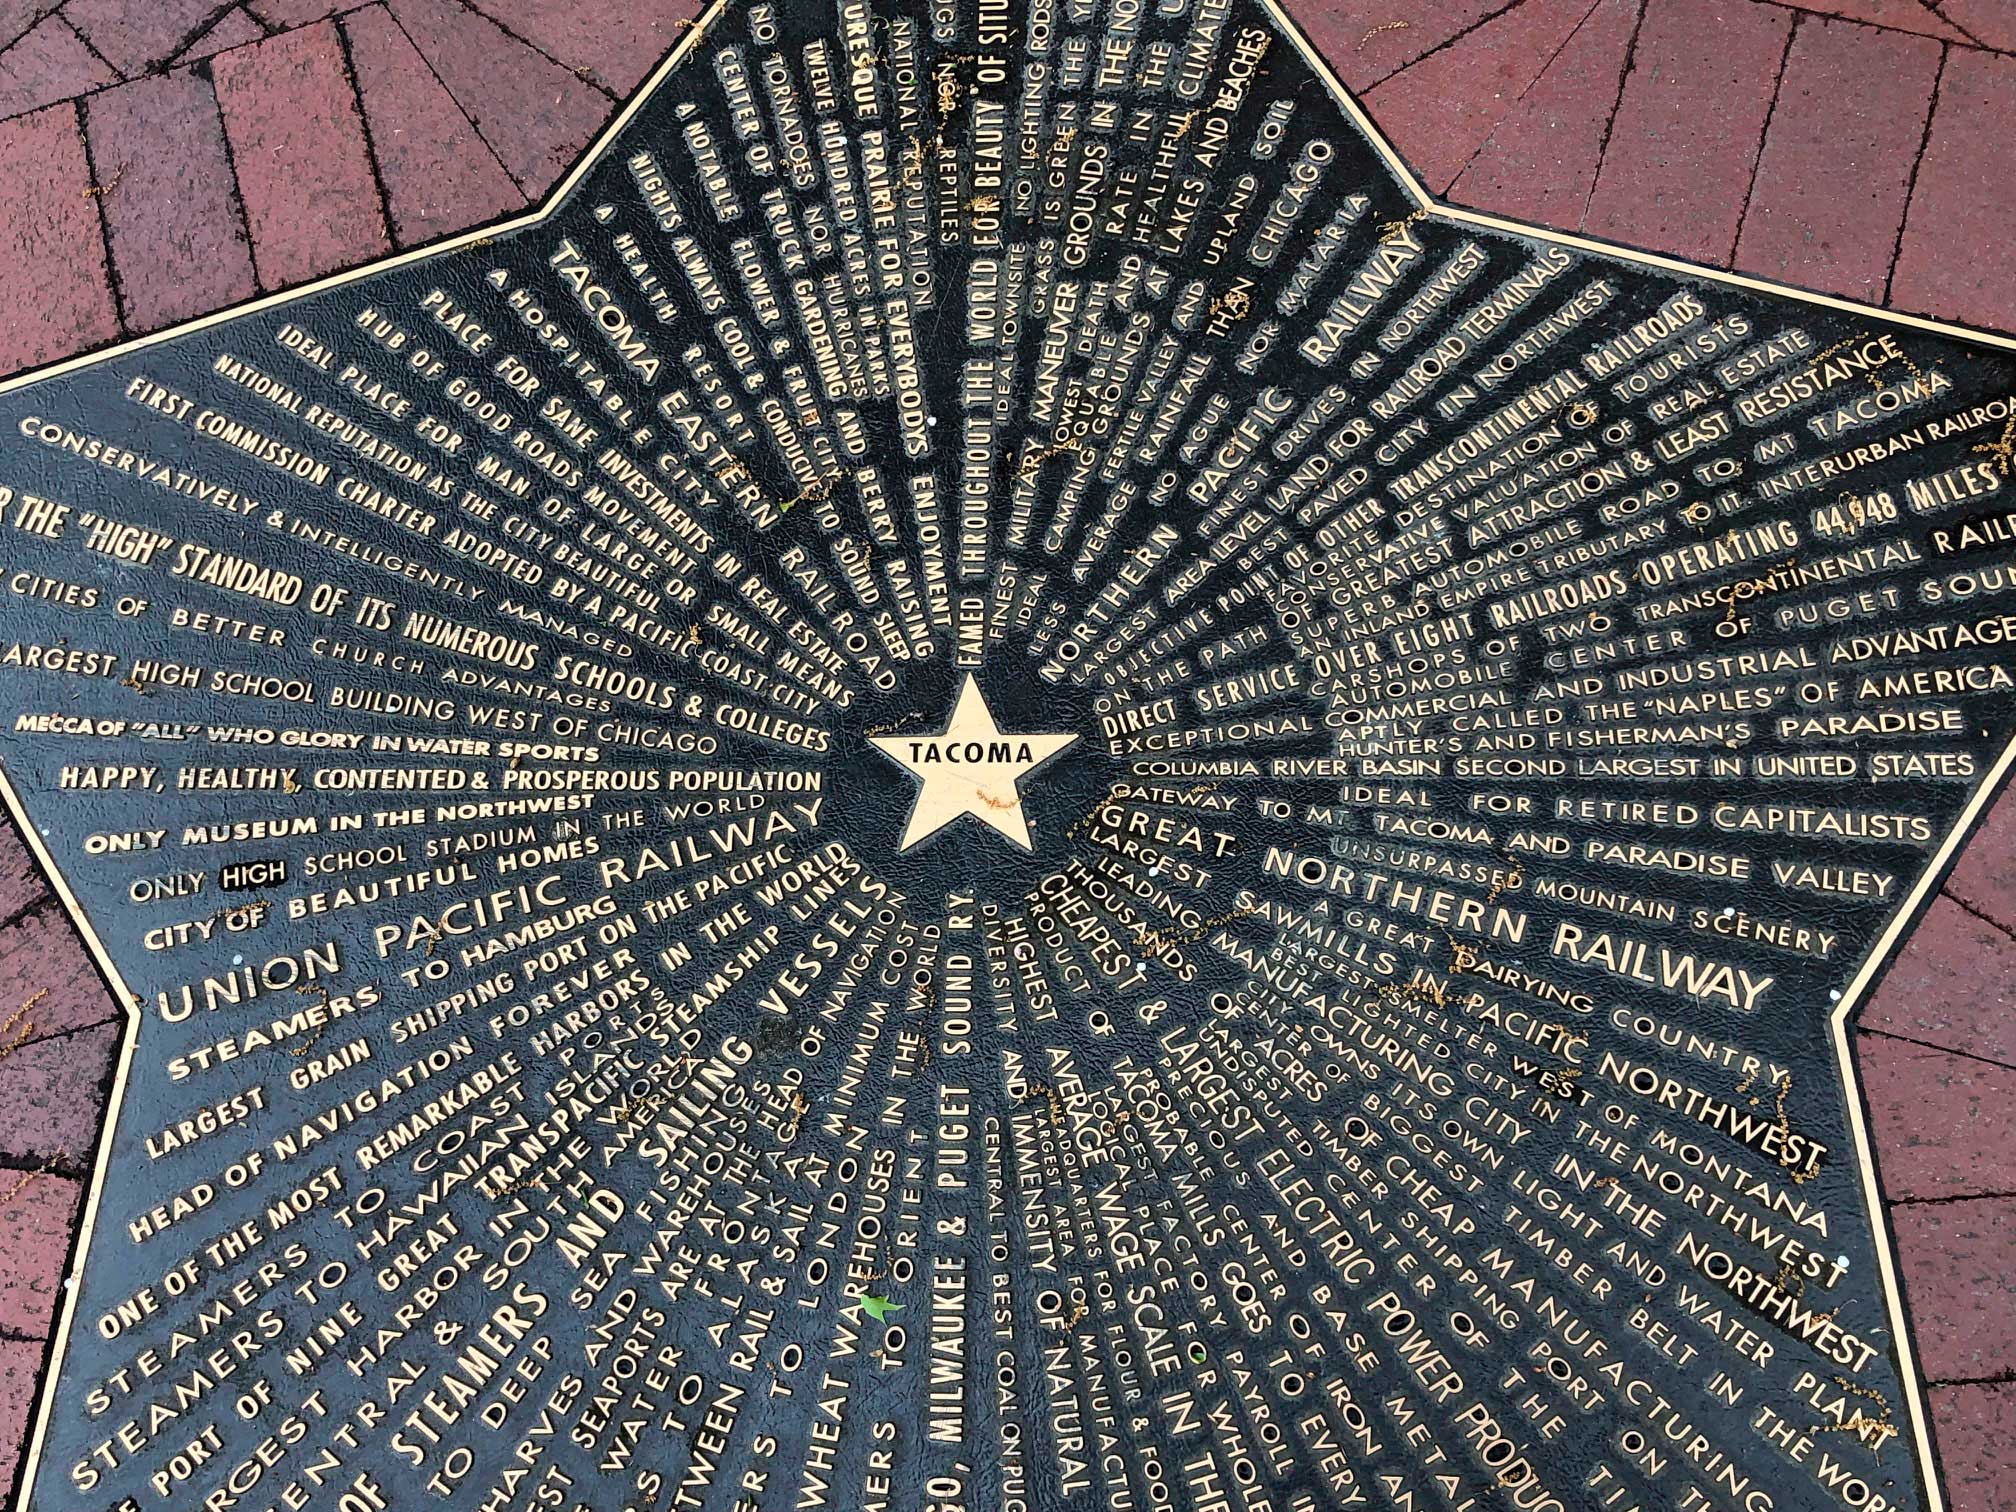 Allen Mason's "Star of Destiny" was his way of expressing his view of the city as a center of ever-expanding, near explosive, pulsing potential with opportunities and advantages from rail lines and ample resources to “The grass stays green all winter”, “Ideal for Retired Capitalists”, "The 'Naples' of  America" and “No poisonous bugs or reptiles”.   You can see it on the corner of North 26th & Washington.  Photo: Morf Morford